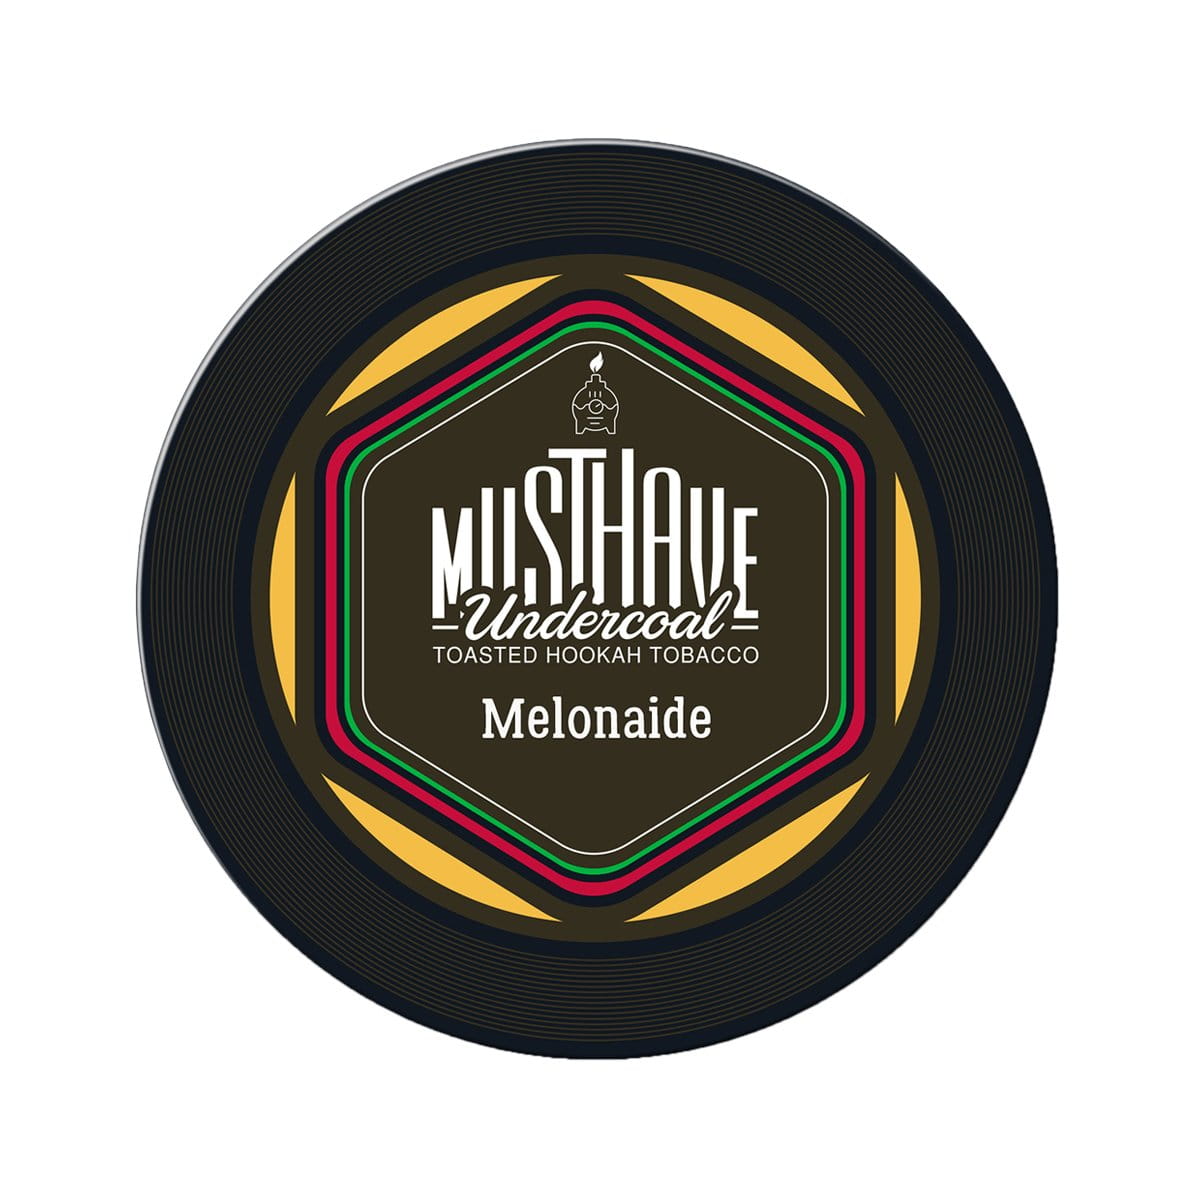 Musthave Tobacco - Melonaide 25g